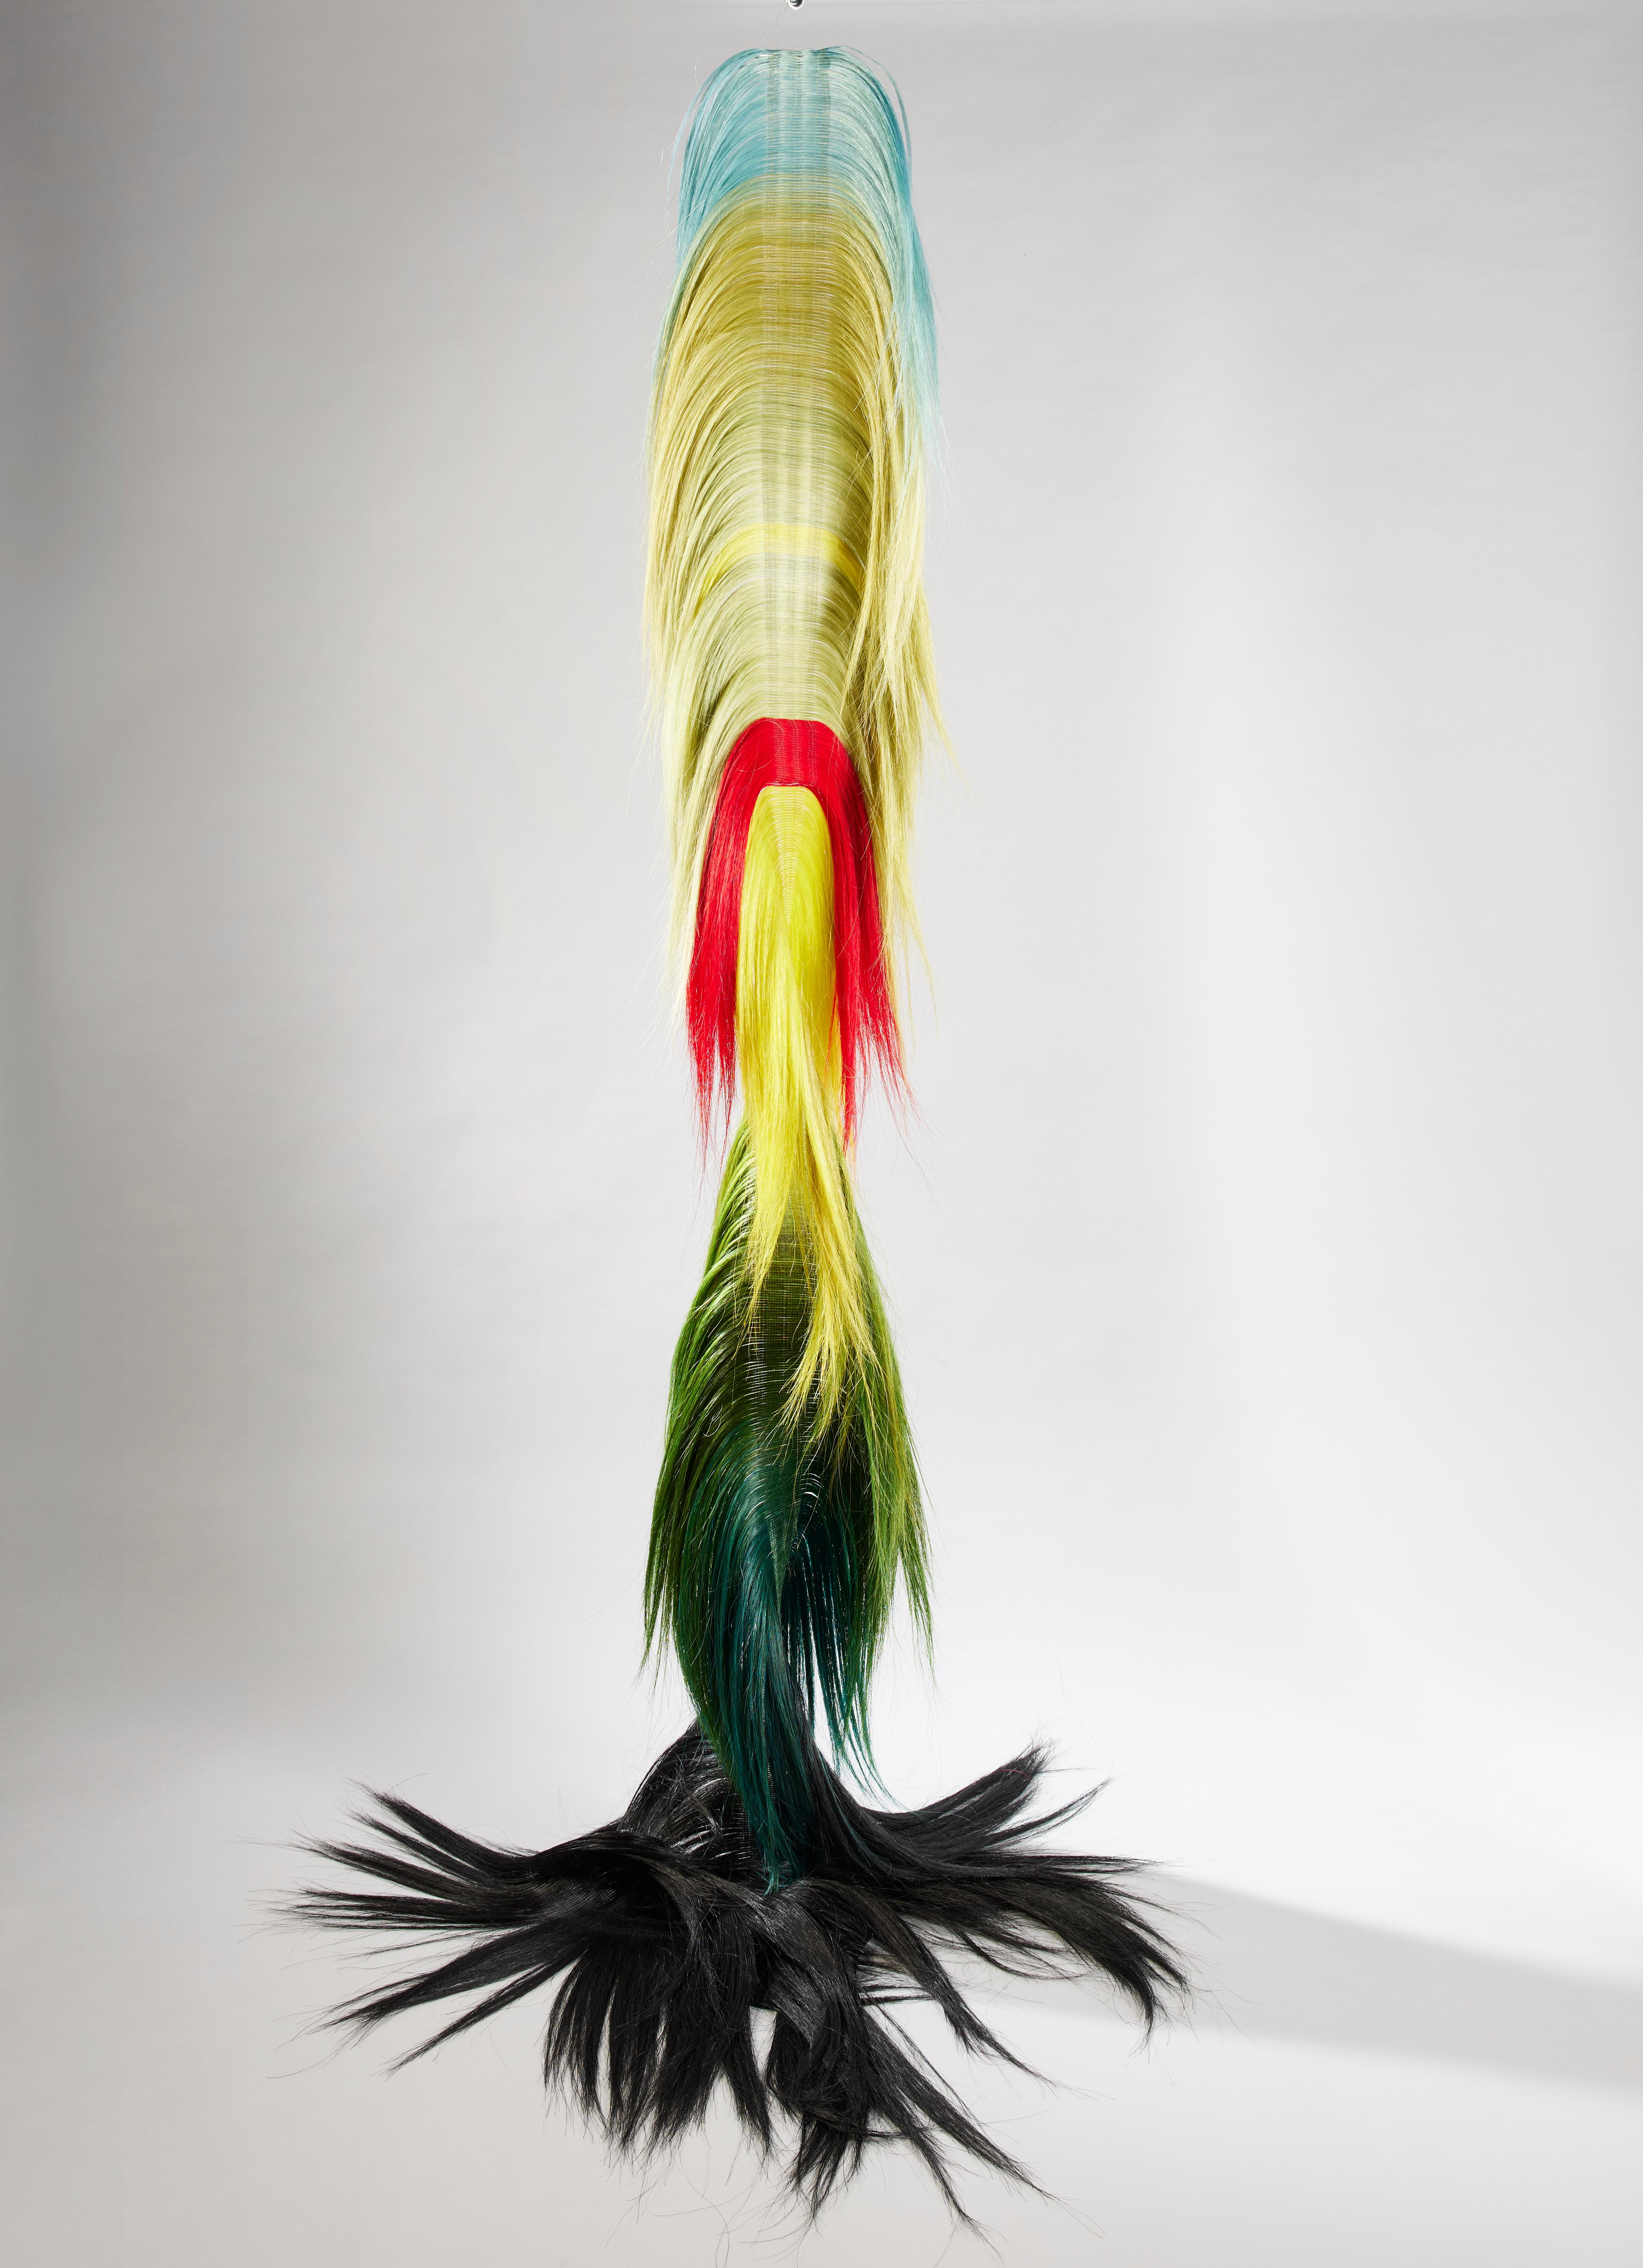 Ulrika Liljedahl Abstract Sculpture - Horsehair Installation Présence Polychrome Made in France One of a Kind